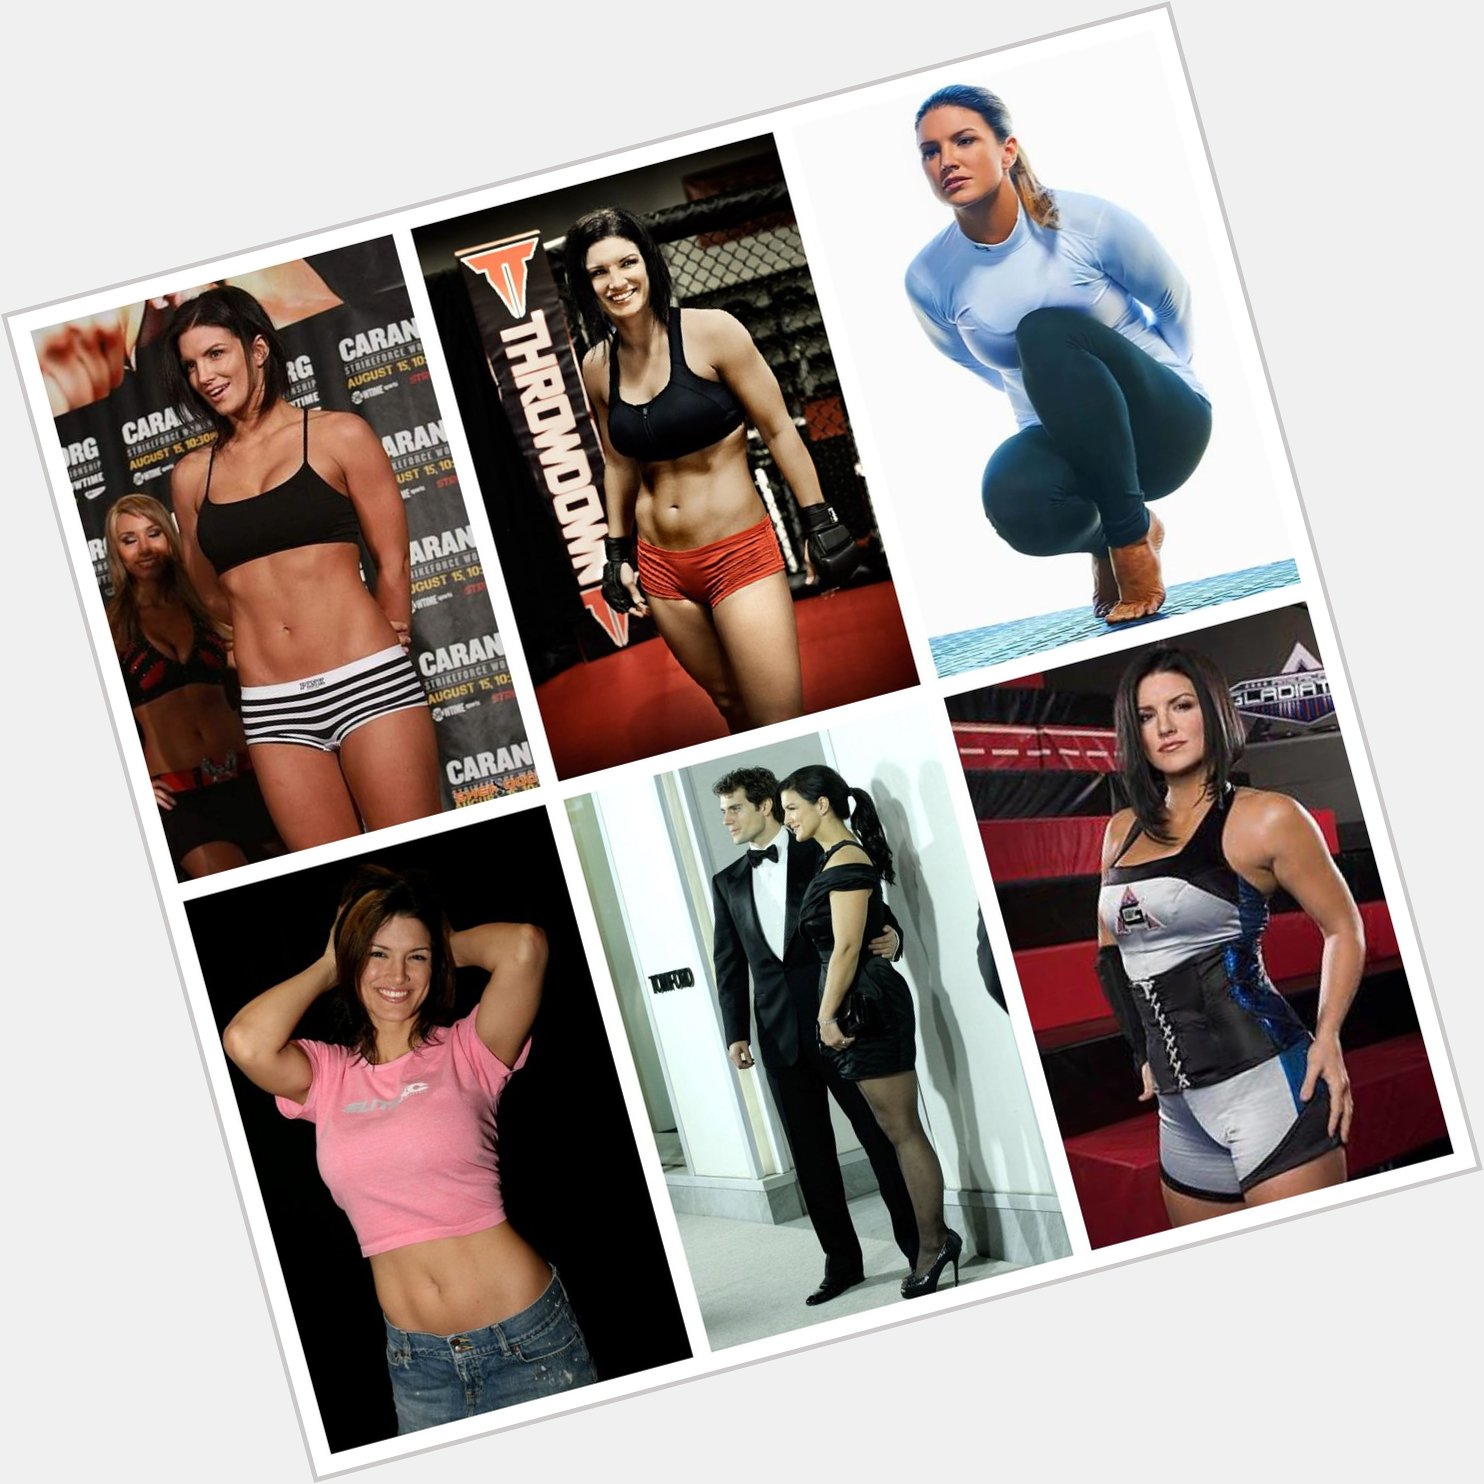 Happy Birthday American actress, fitness model and former MMA fighter Gina Carano, now 40 years old. 